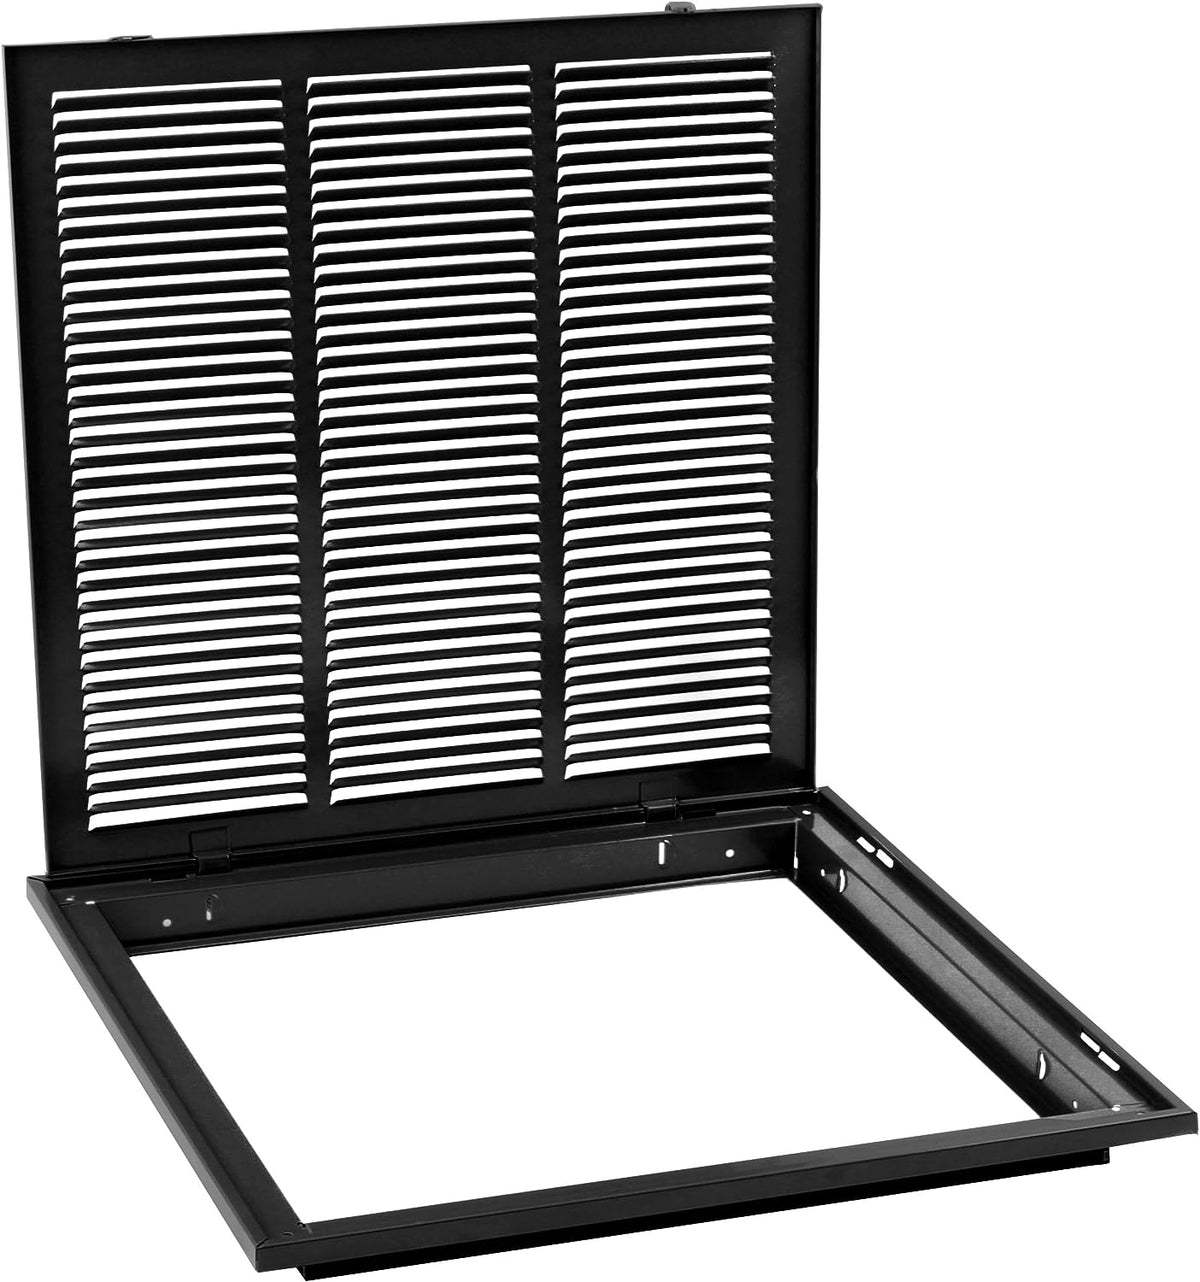 14&quot; X 20&quot; Steel Return Air Filter Grille for 1&quot; Filter - Removable Frame - [Outer Dimensions: 16 5/8&quot; X 22 5/8&quot;]